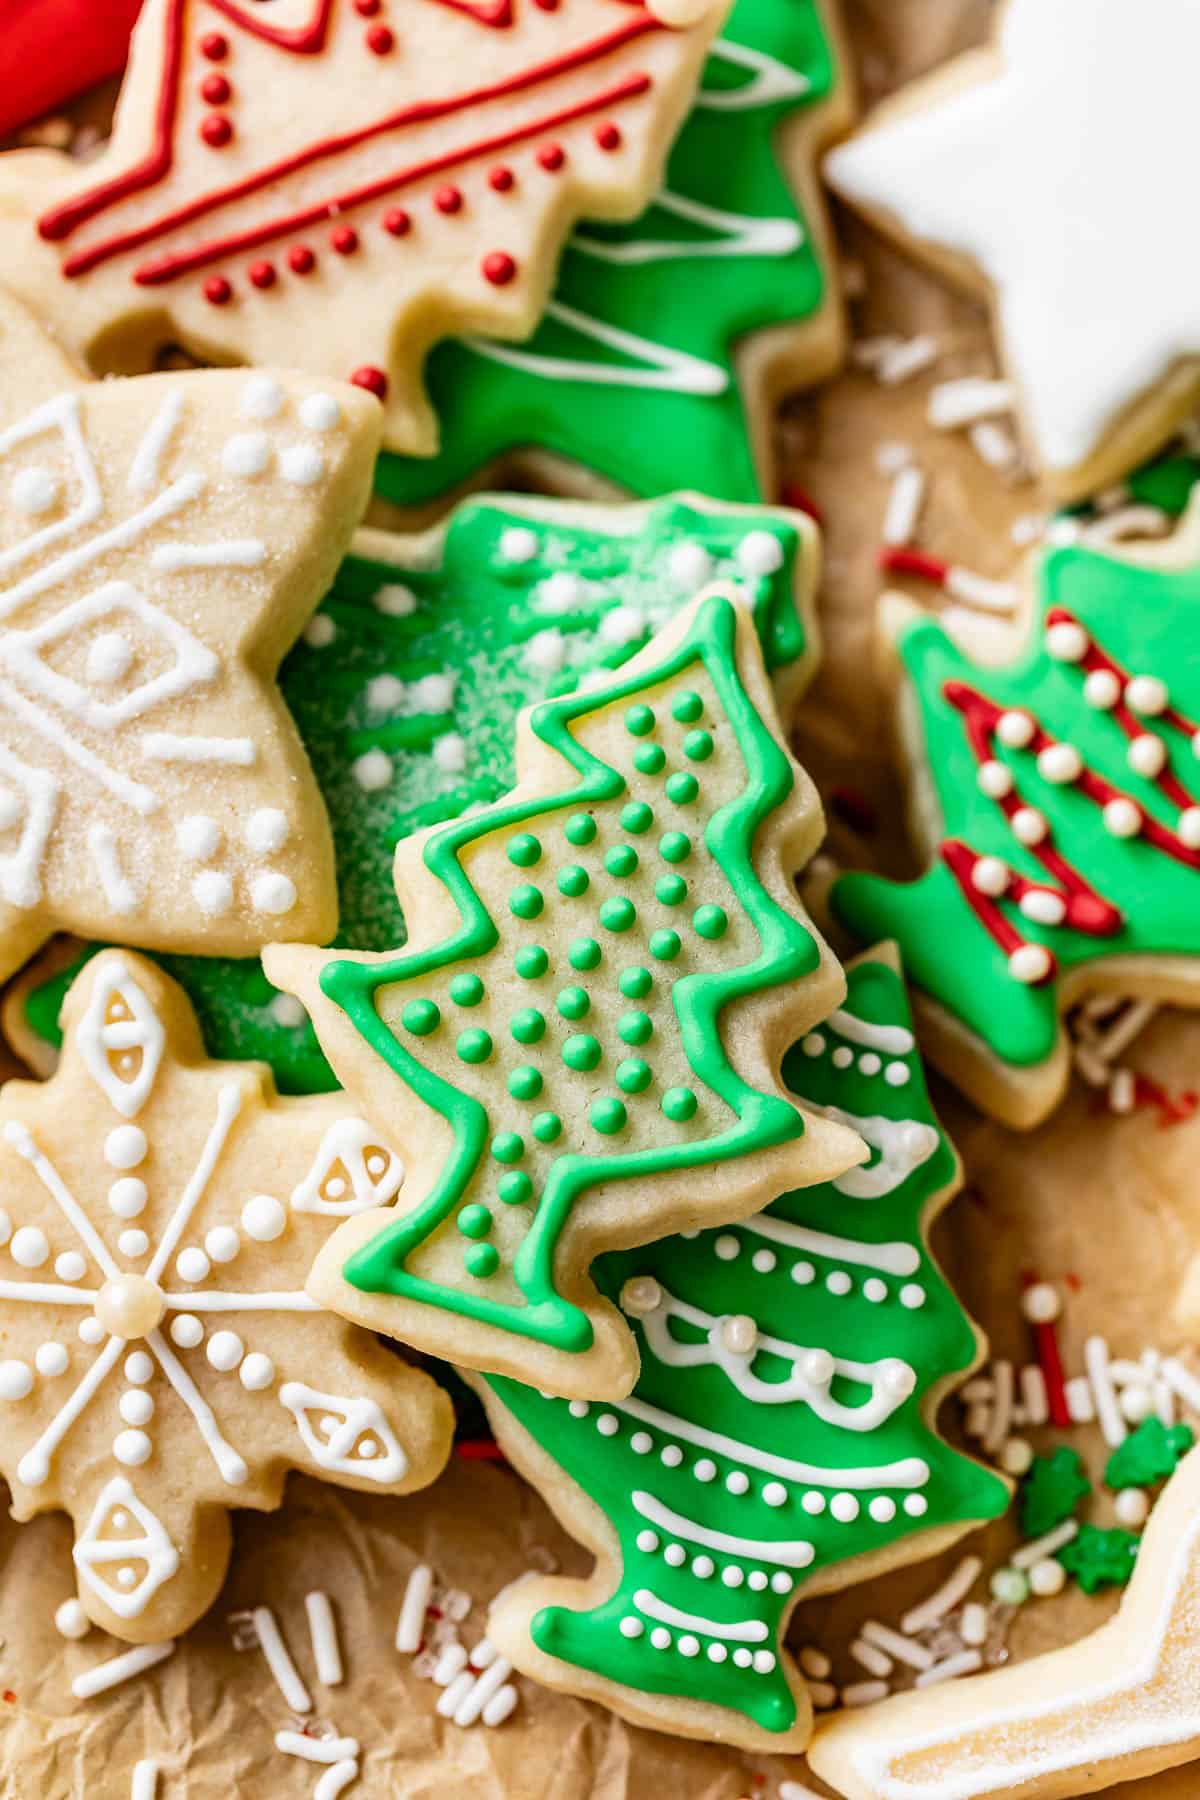 Decorated Christmas holiday cookies including tree, snowflake, and stars.